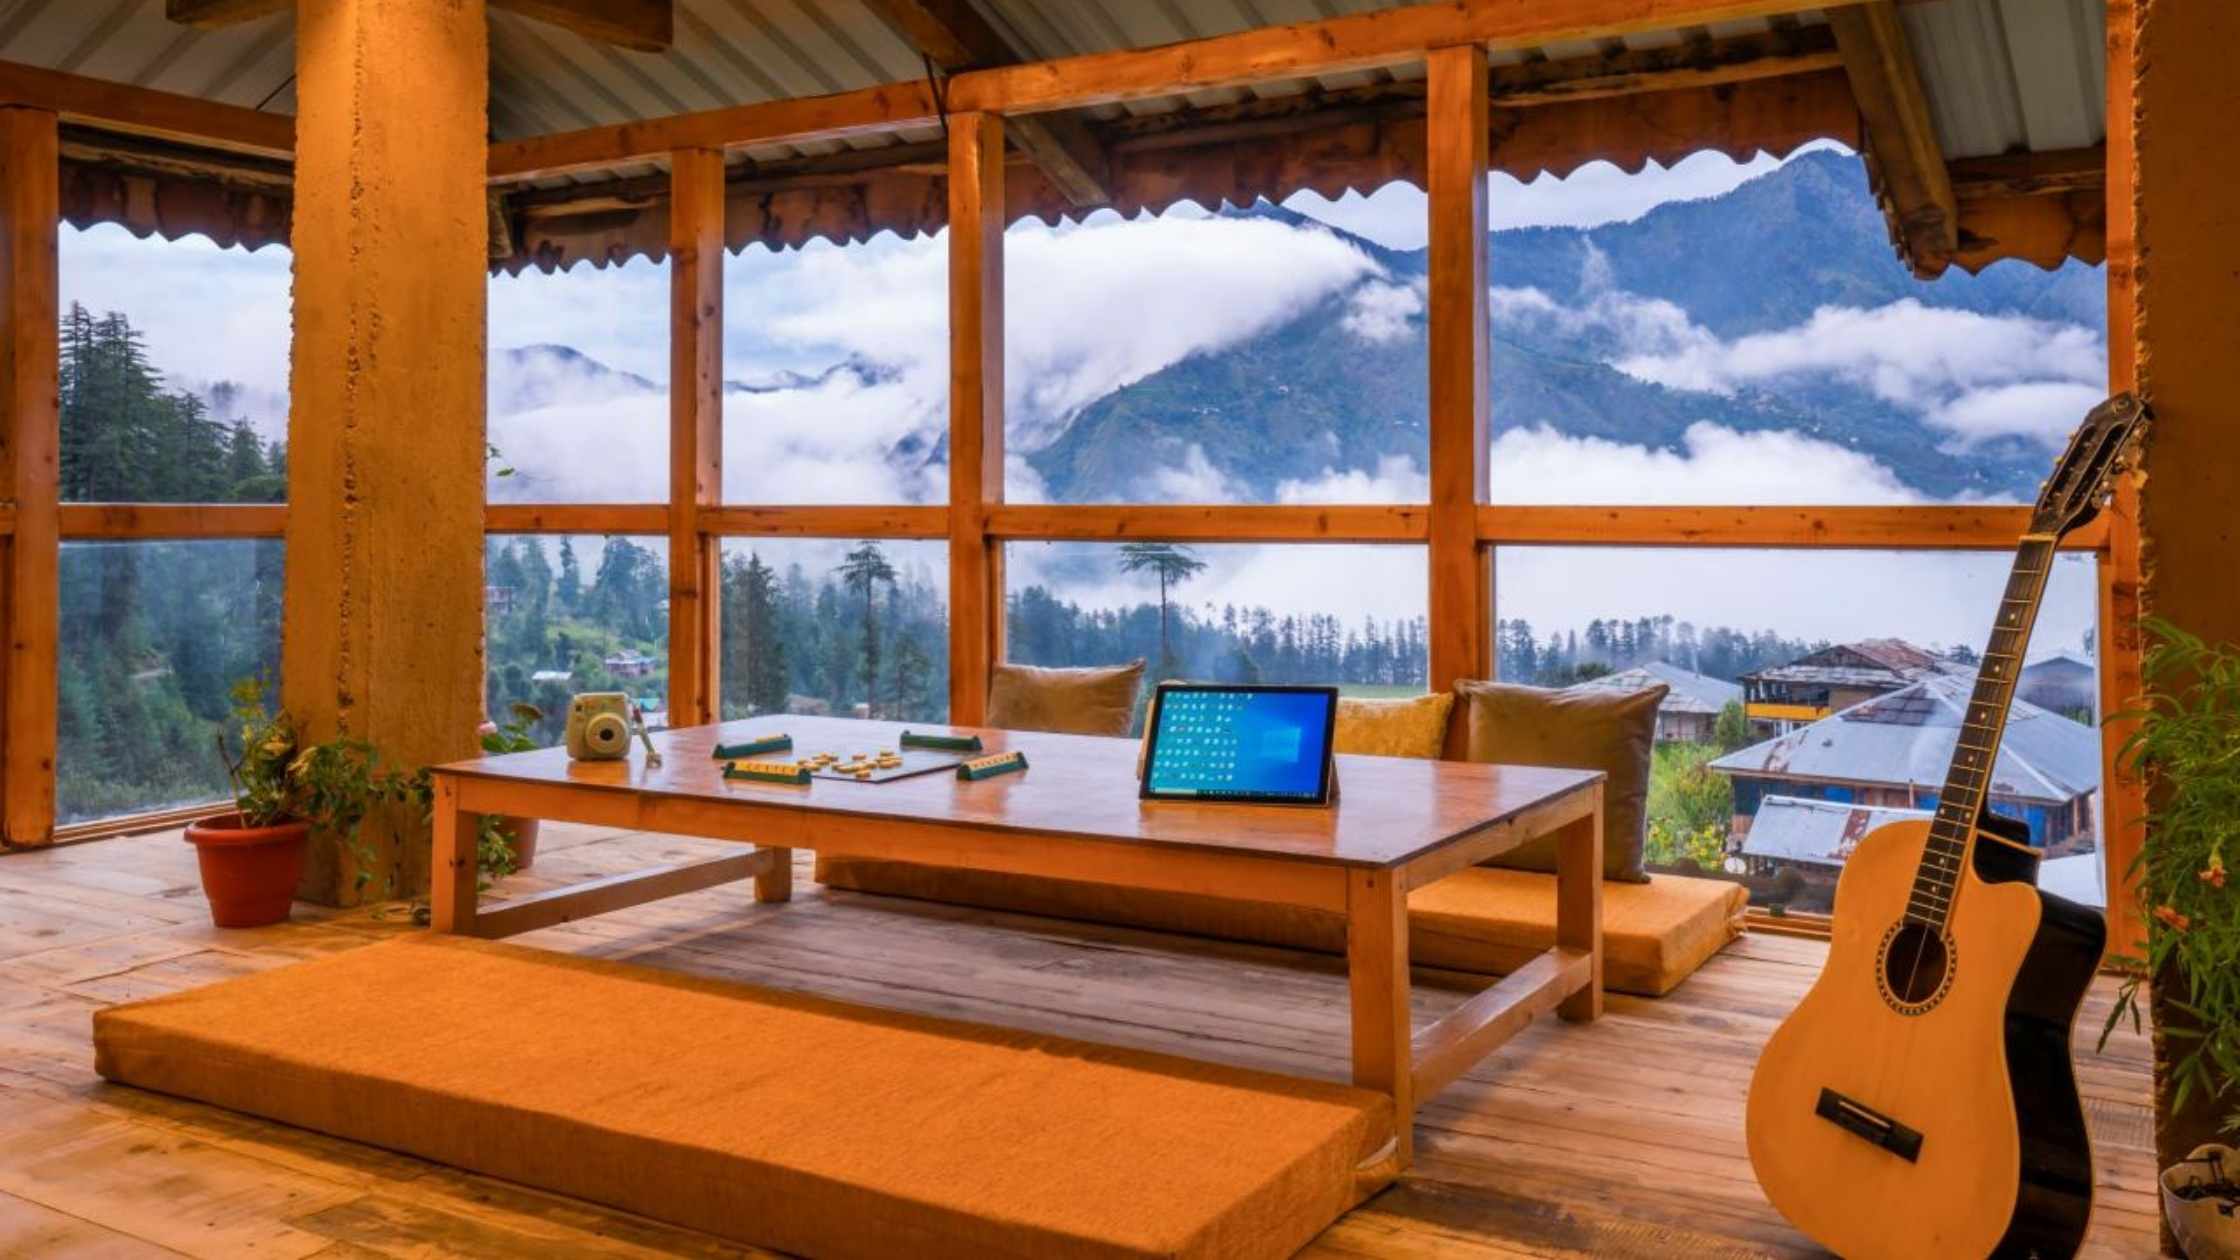 Enjoy a Happening Stay with like-Minded Travellers at These Stunning Zostels of Himachal Pradesh